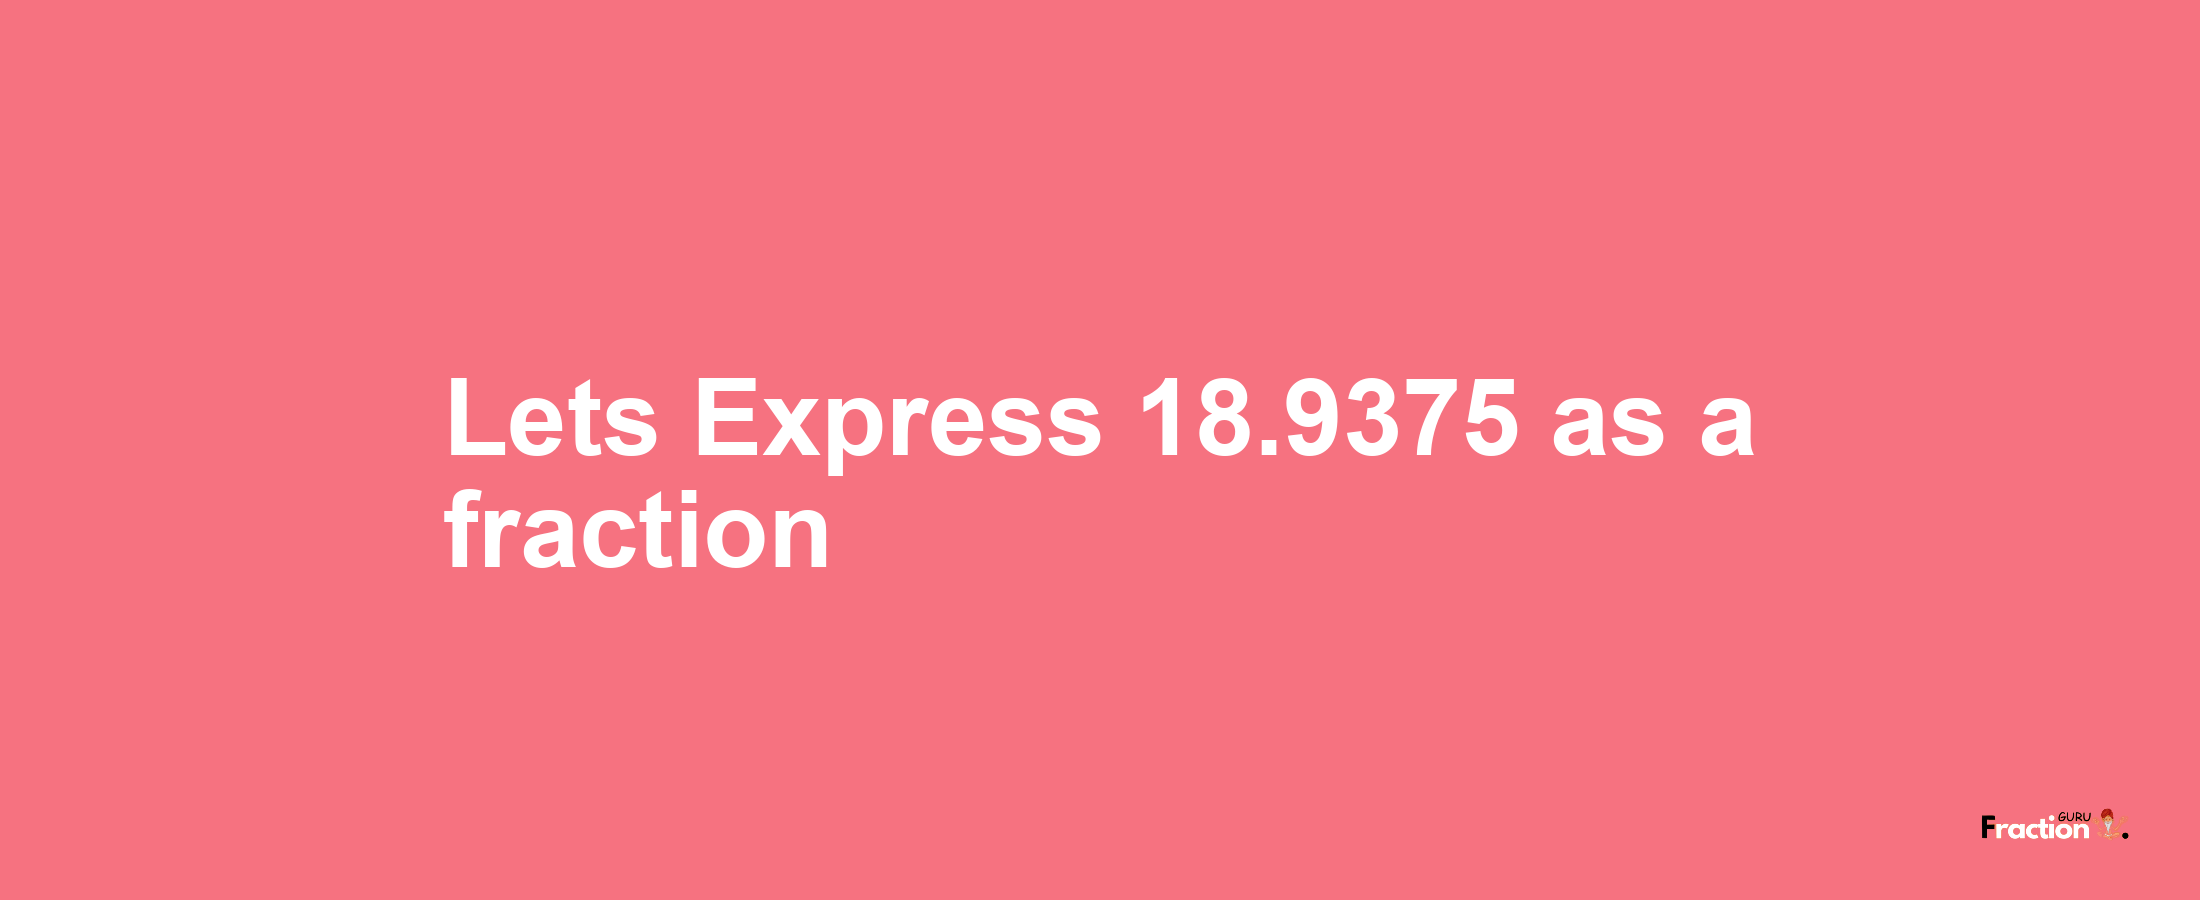 Lets Express 18.9375 as afraction